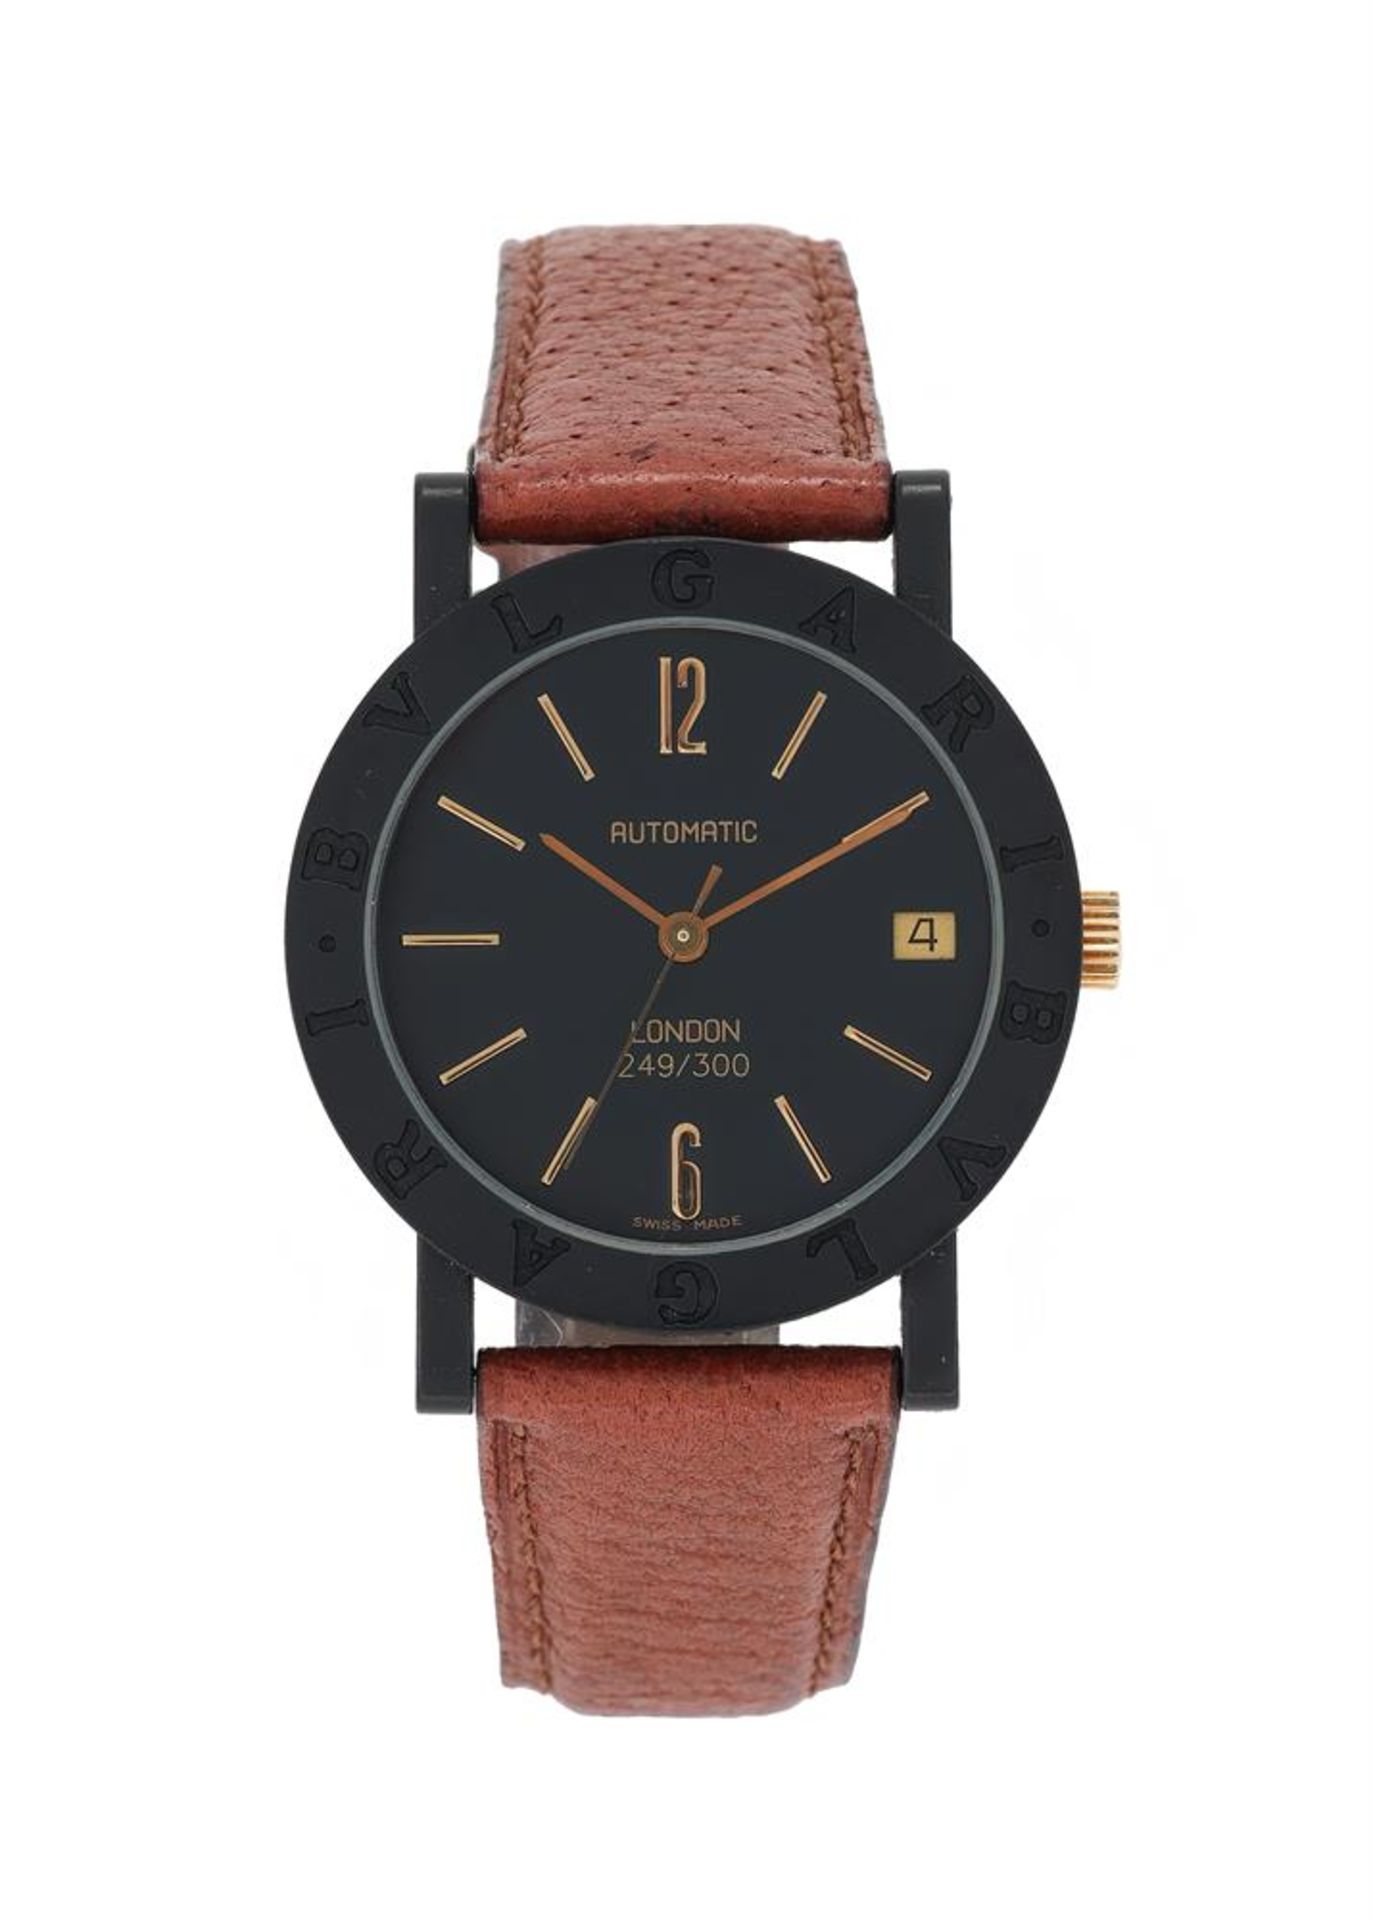 BULGARI, BULGARI CARBON GOLD, A LIMITED EDITION CARBON WRIST WATCH WITH DATE